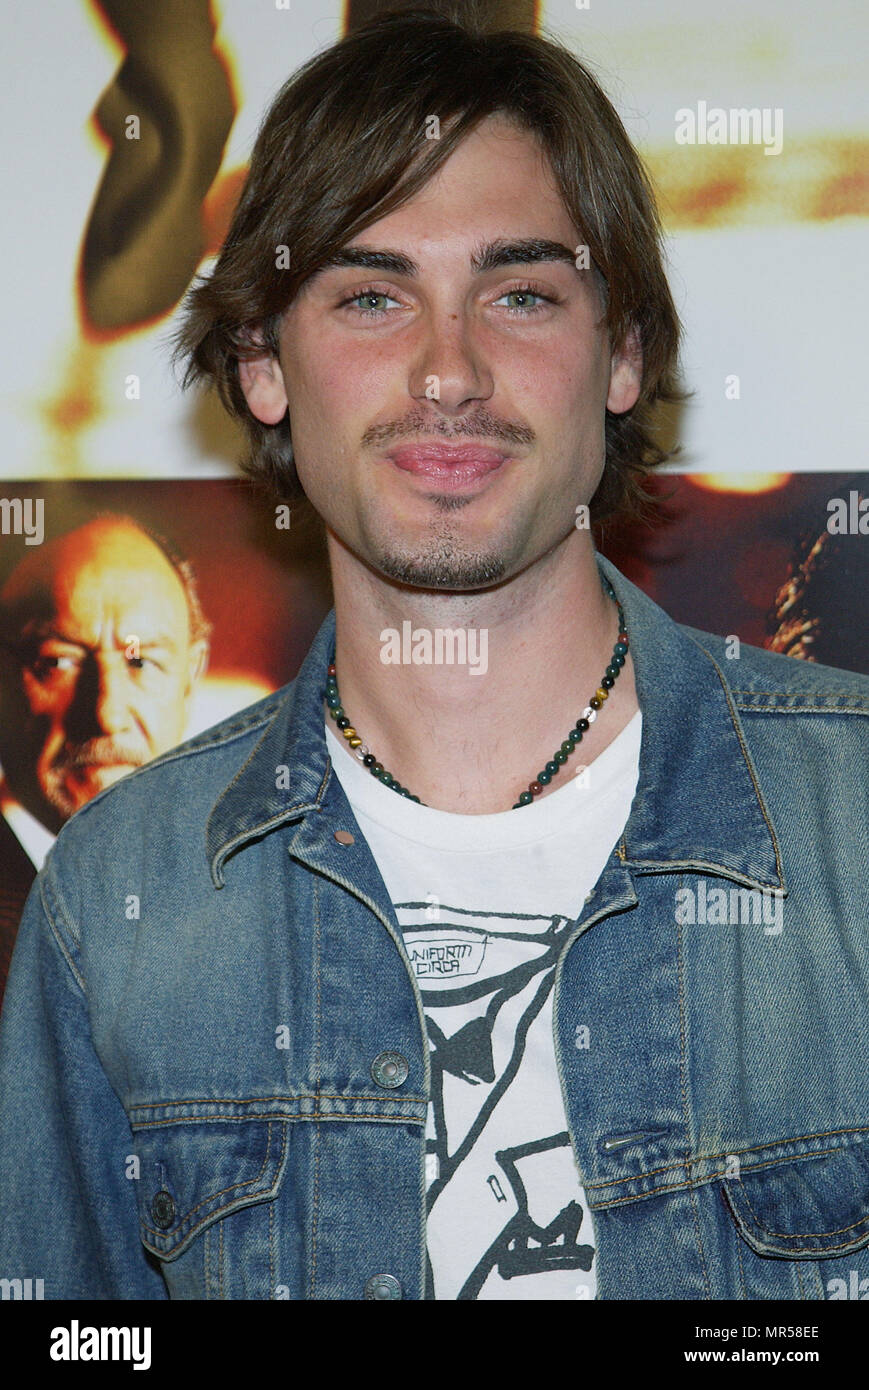 Drew Fuller (Charmed) arriving at the " Runaway Jury Premiere " at the Cinerama Dome in Los Angeles. October 9, 2003.FullerDrew_Charmed049 Red Carpet Event, Vertical, USA, Film Industry, Celebrities,  Photography, Bestof, Arts Culture and Entertainment, Topix Celebrities fashion /  Vertical, Best of, Event in Hollywood Life - California,  Red Carpet and backstage, USA, Film Industry, Celebrities,  movie celebrities, TV celebrities, Music celebrities, Photography, Bestof, Arts Culture and Entertainment,  Topix, headshot, vertical, one person,, from the year , 2003, inquiry tsuni@Gamma-USA.com Stock Photo